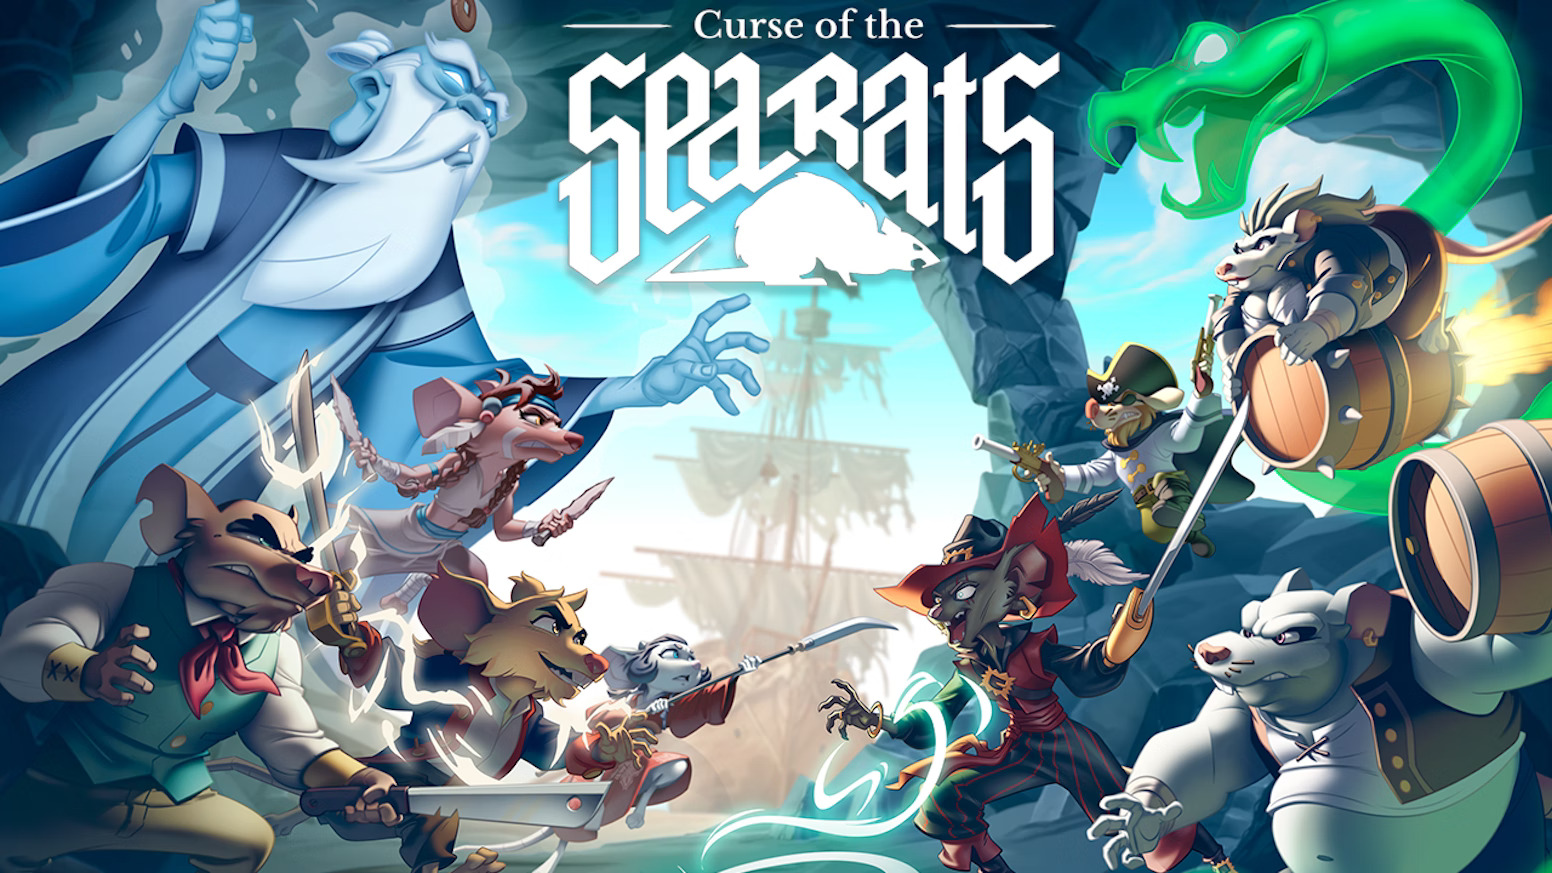 Curse of the | Rats work but preview looks Hands-on Sea great needs